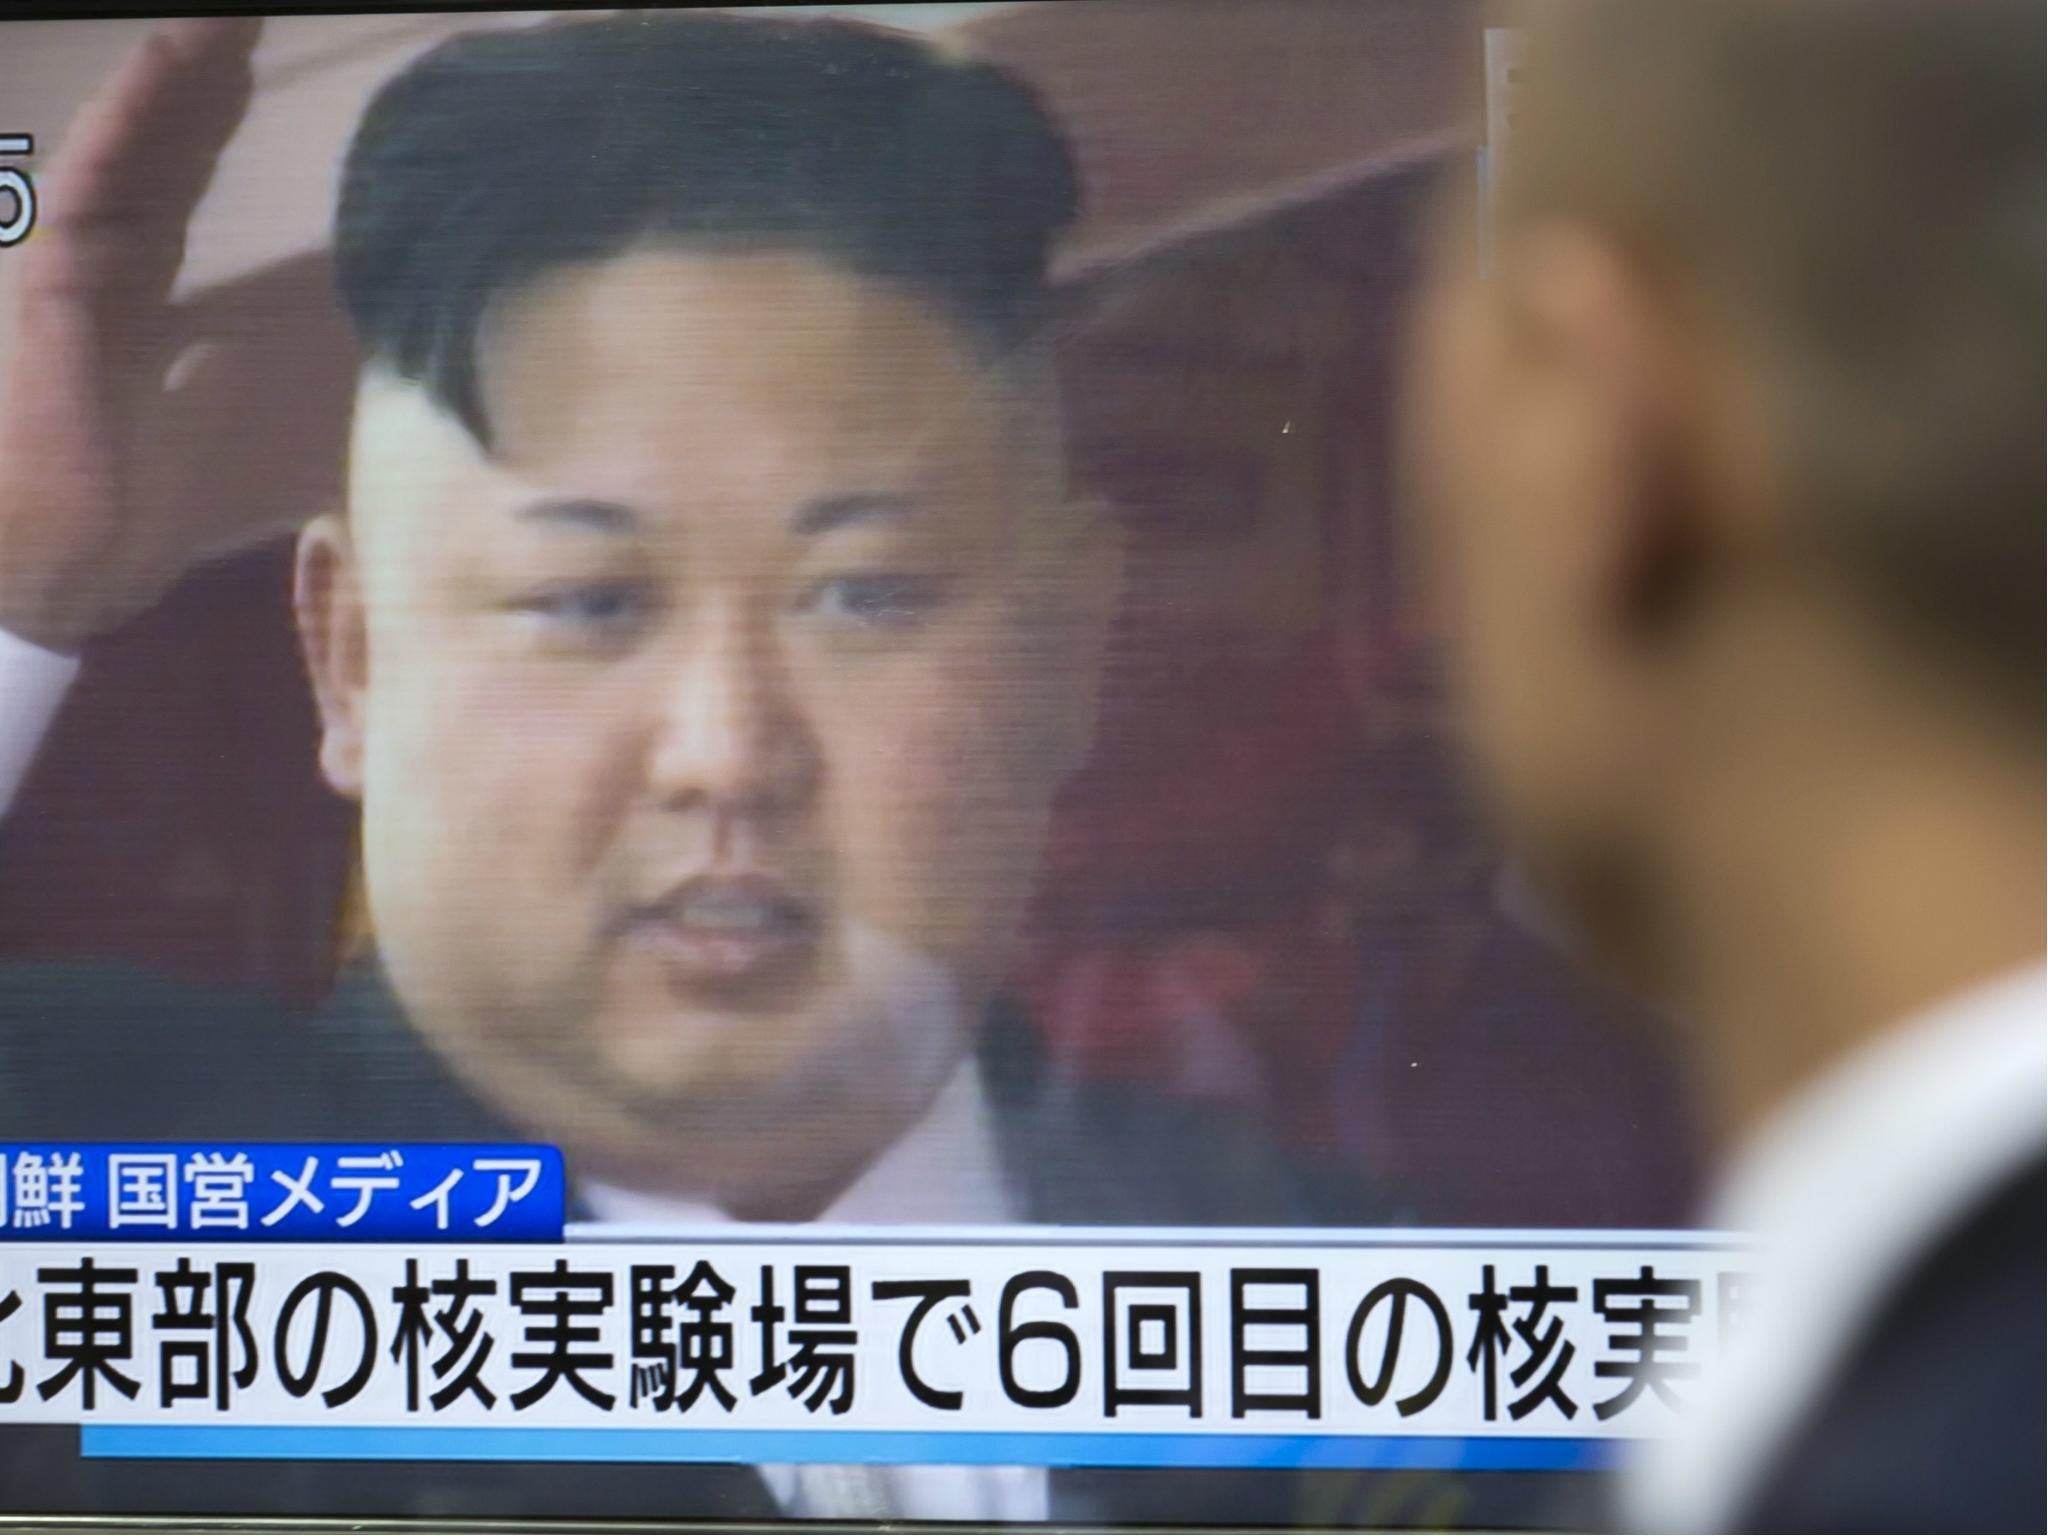 A pedestrian watches a monitor showing an image of North Korean leader Kim Jong-Un in a news program reporting on North Korea's 6th nuclear test on 3 September 2017.